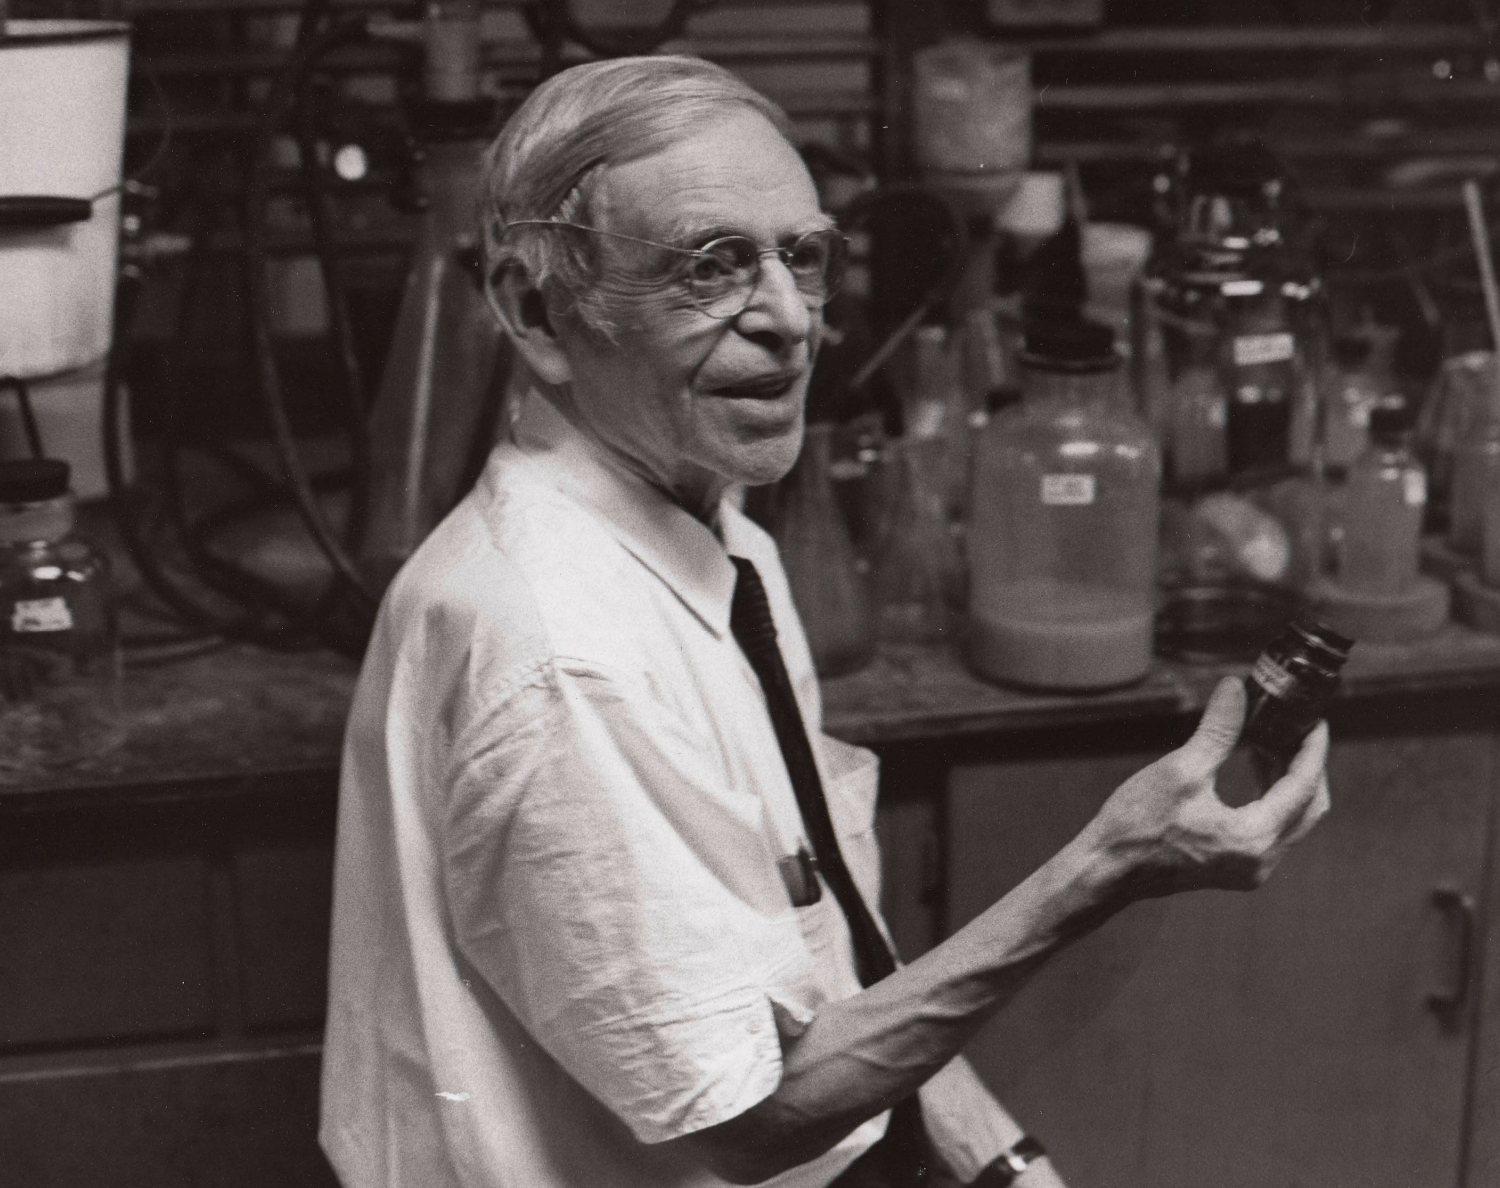 Black and white photograph of Casimir Funk holding a small bottle in a lab. He wears a white short sleeve shirt, a black tie, and round eye glasses.